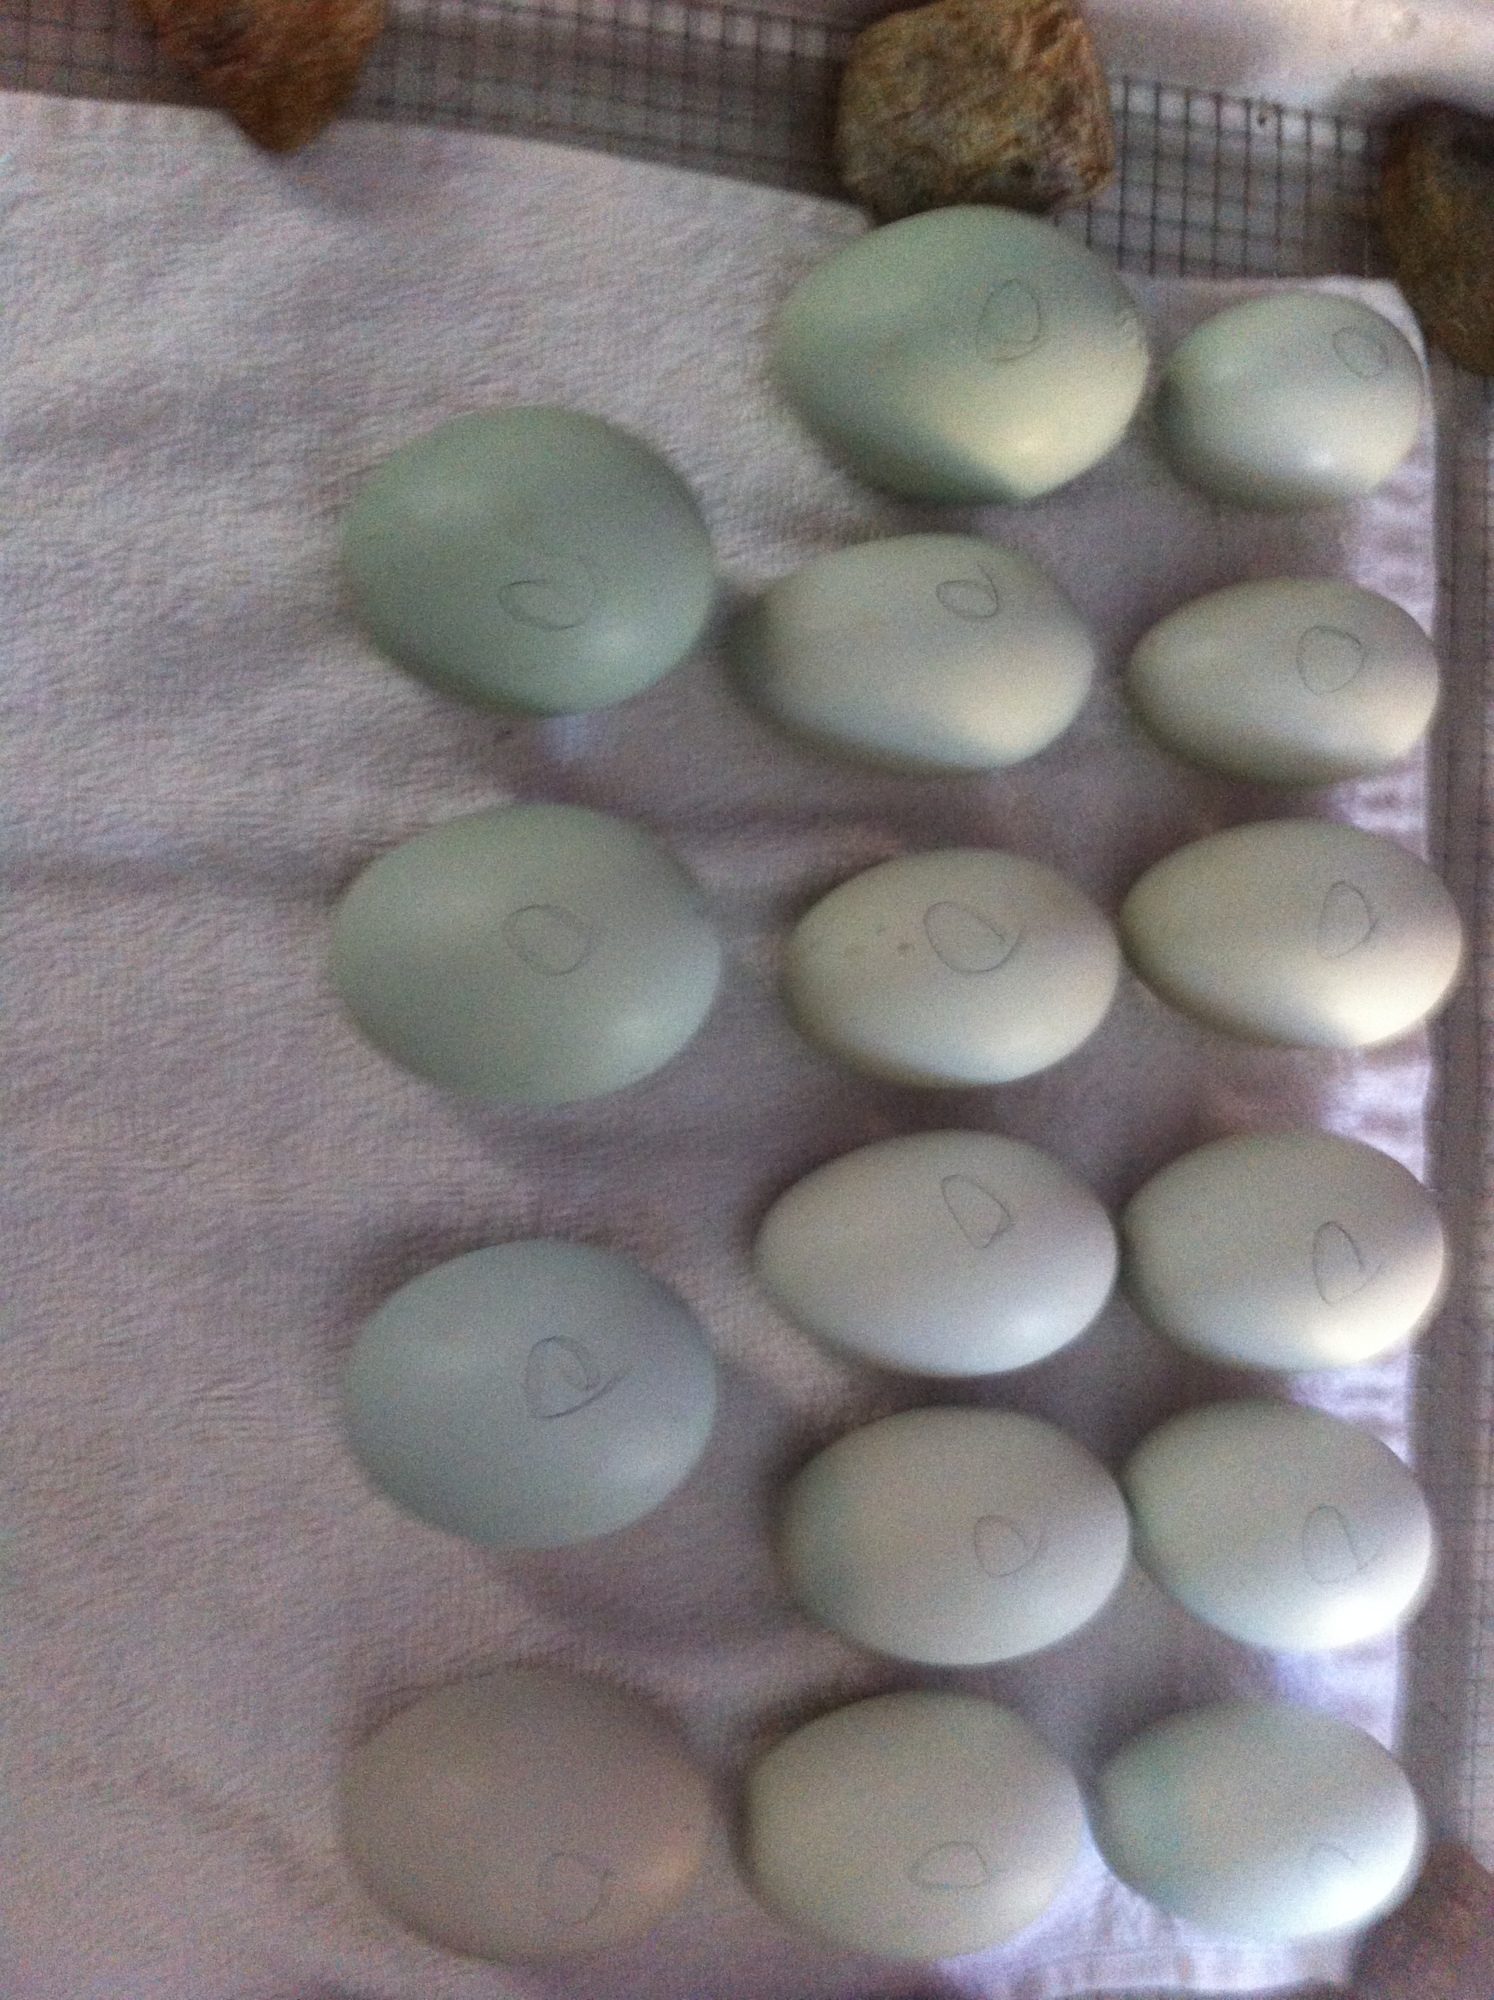 Green/blue eggs going into the incubator!!!